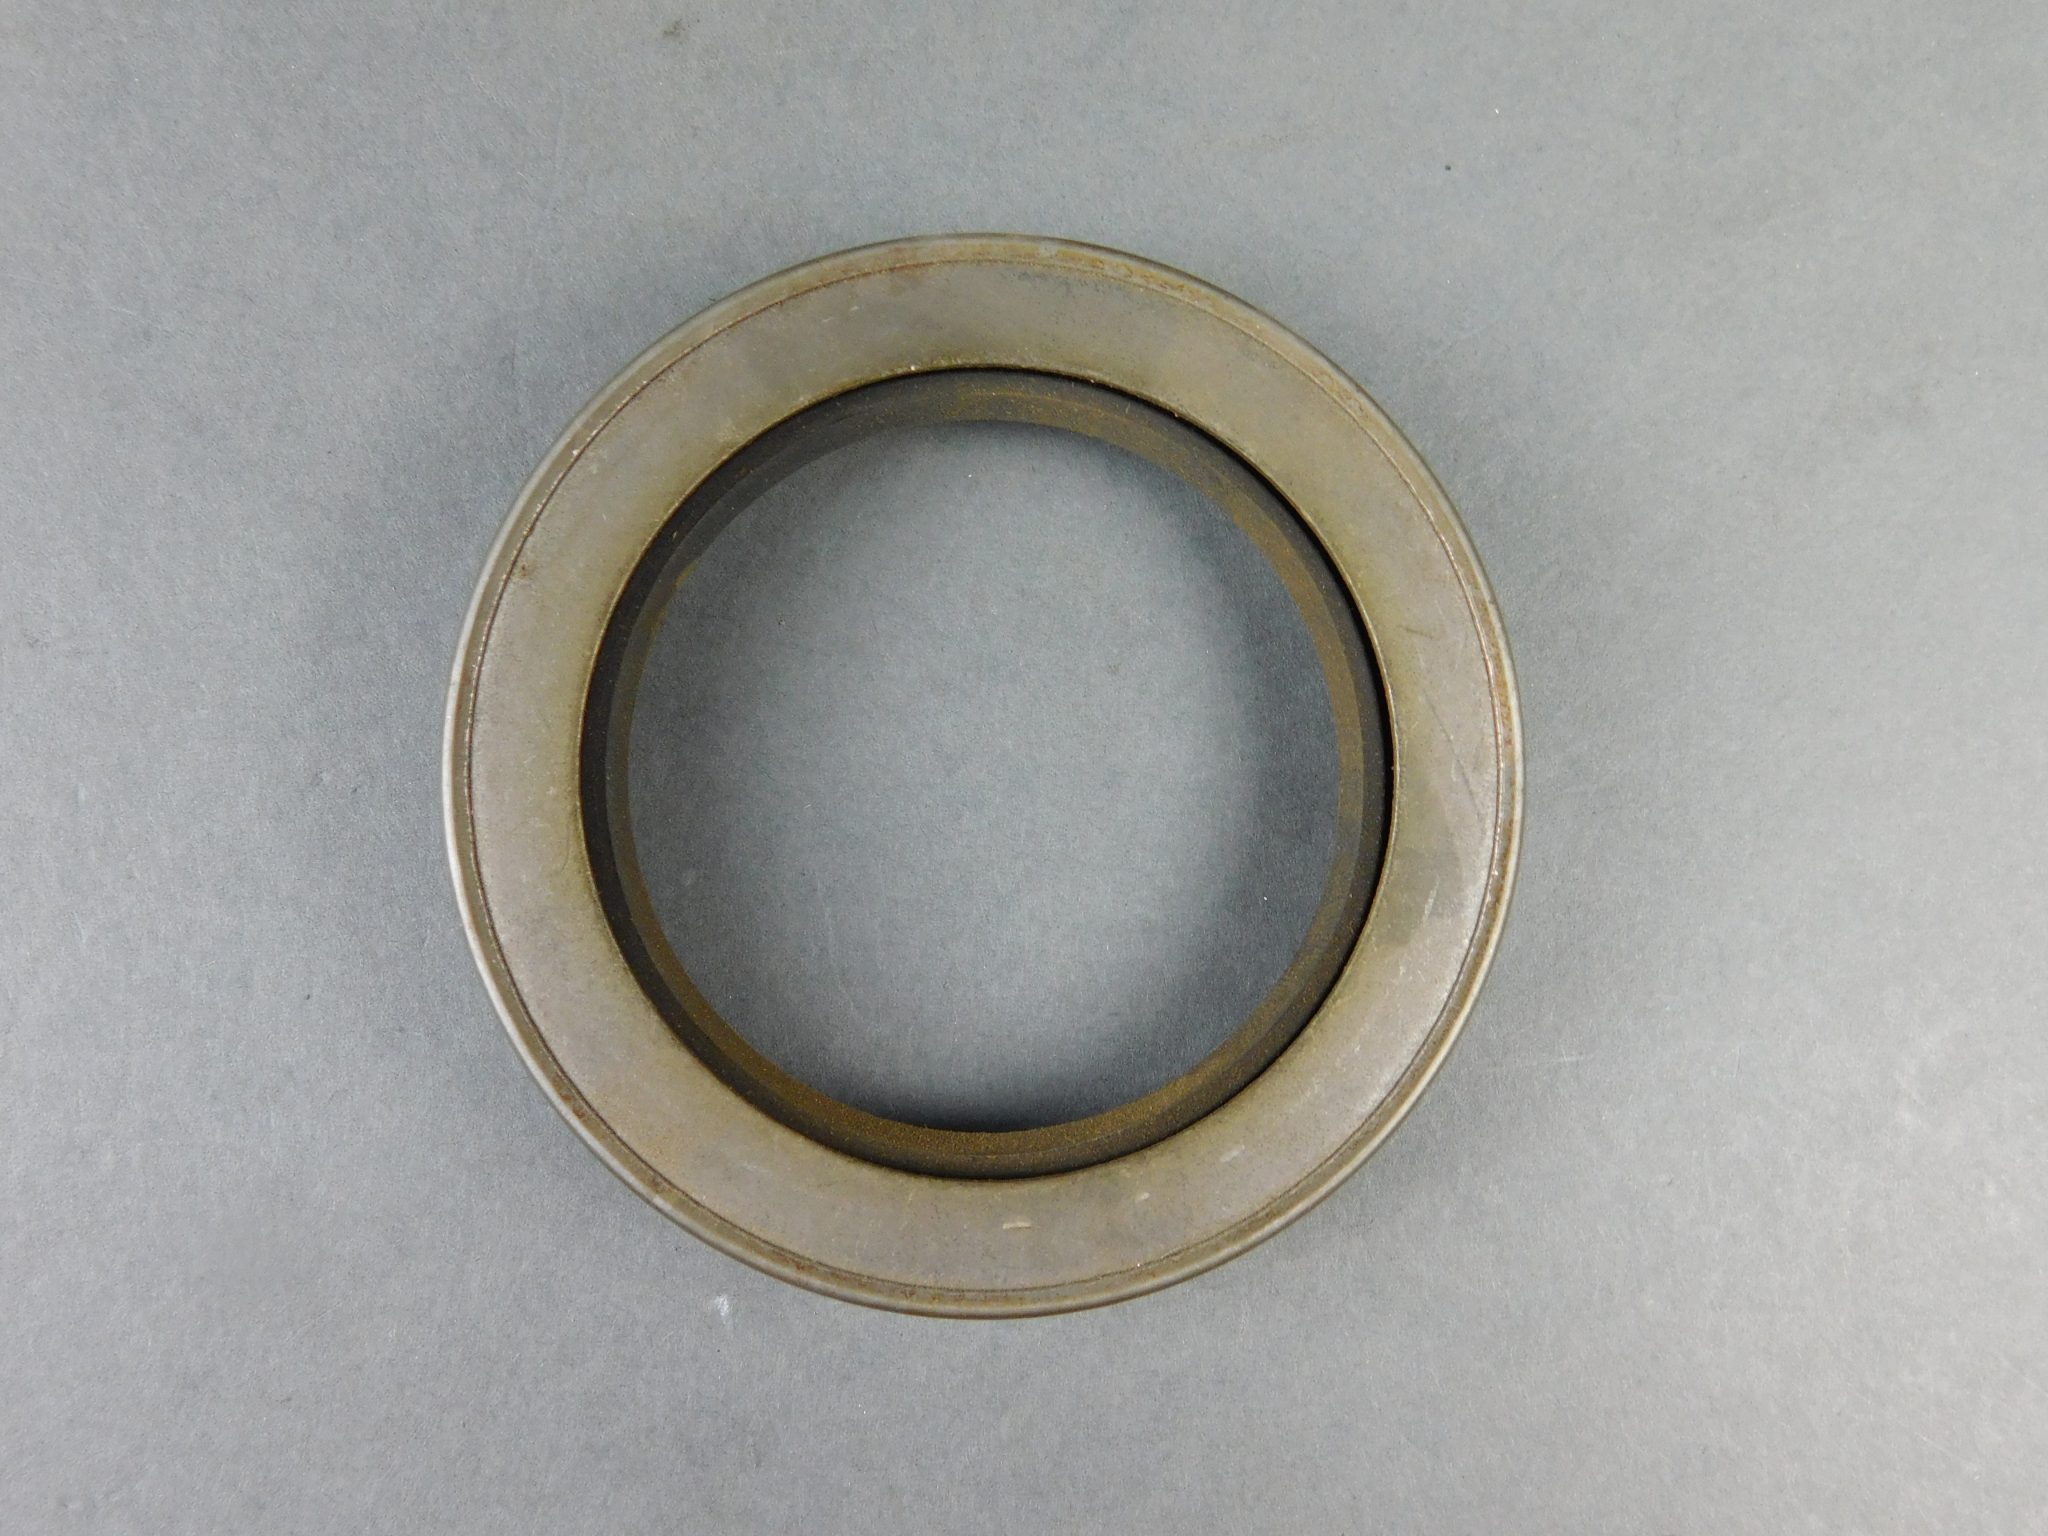 APPROX 2 5/8" X 1 3/4" X 1/4" FEDERAL MOGUL NATIONAL OIL SEAL 6985 